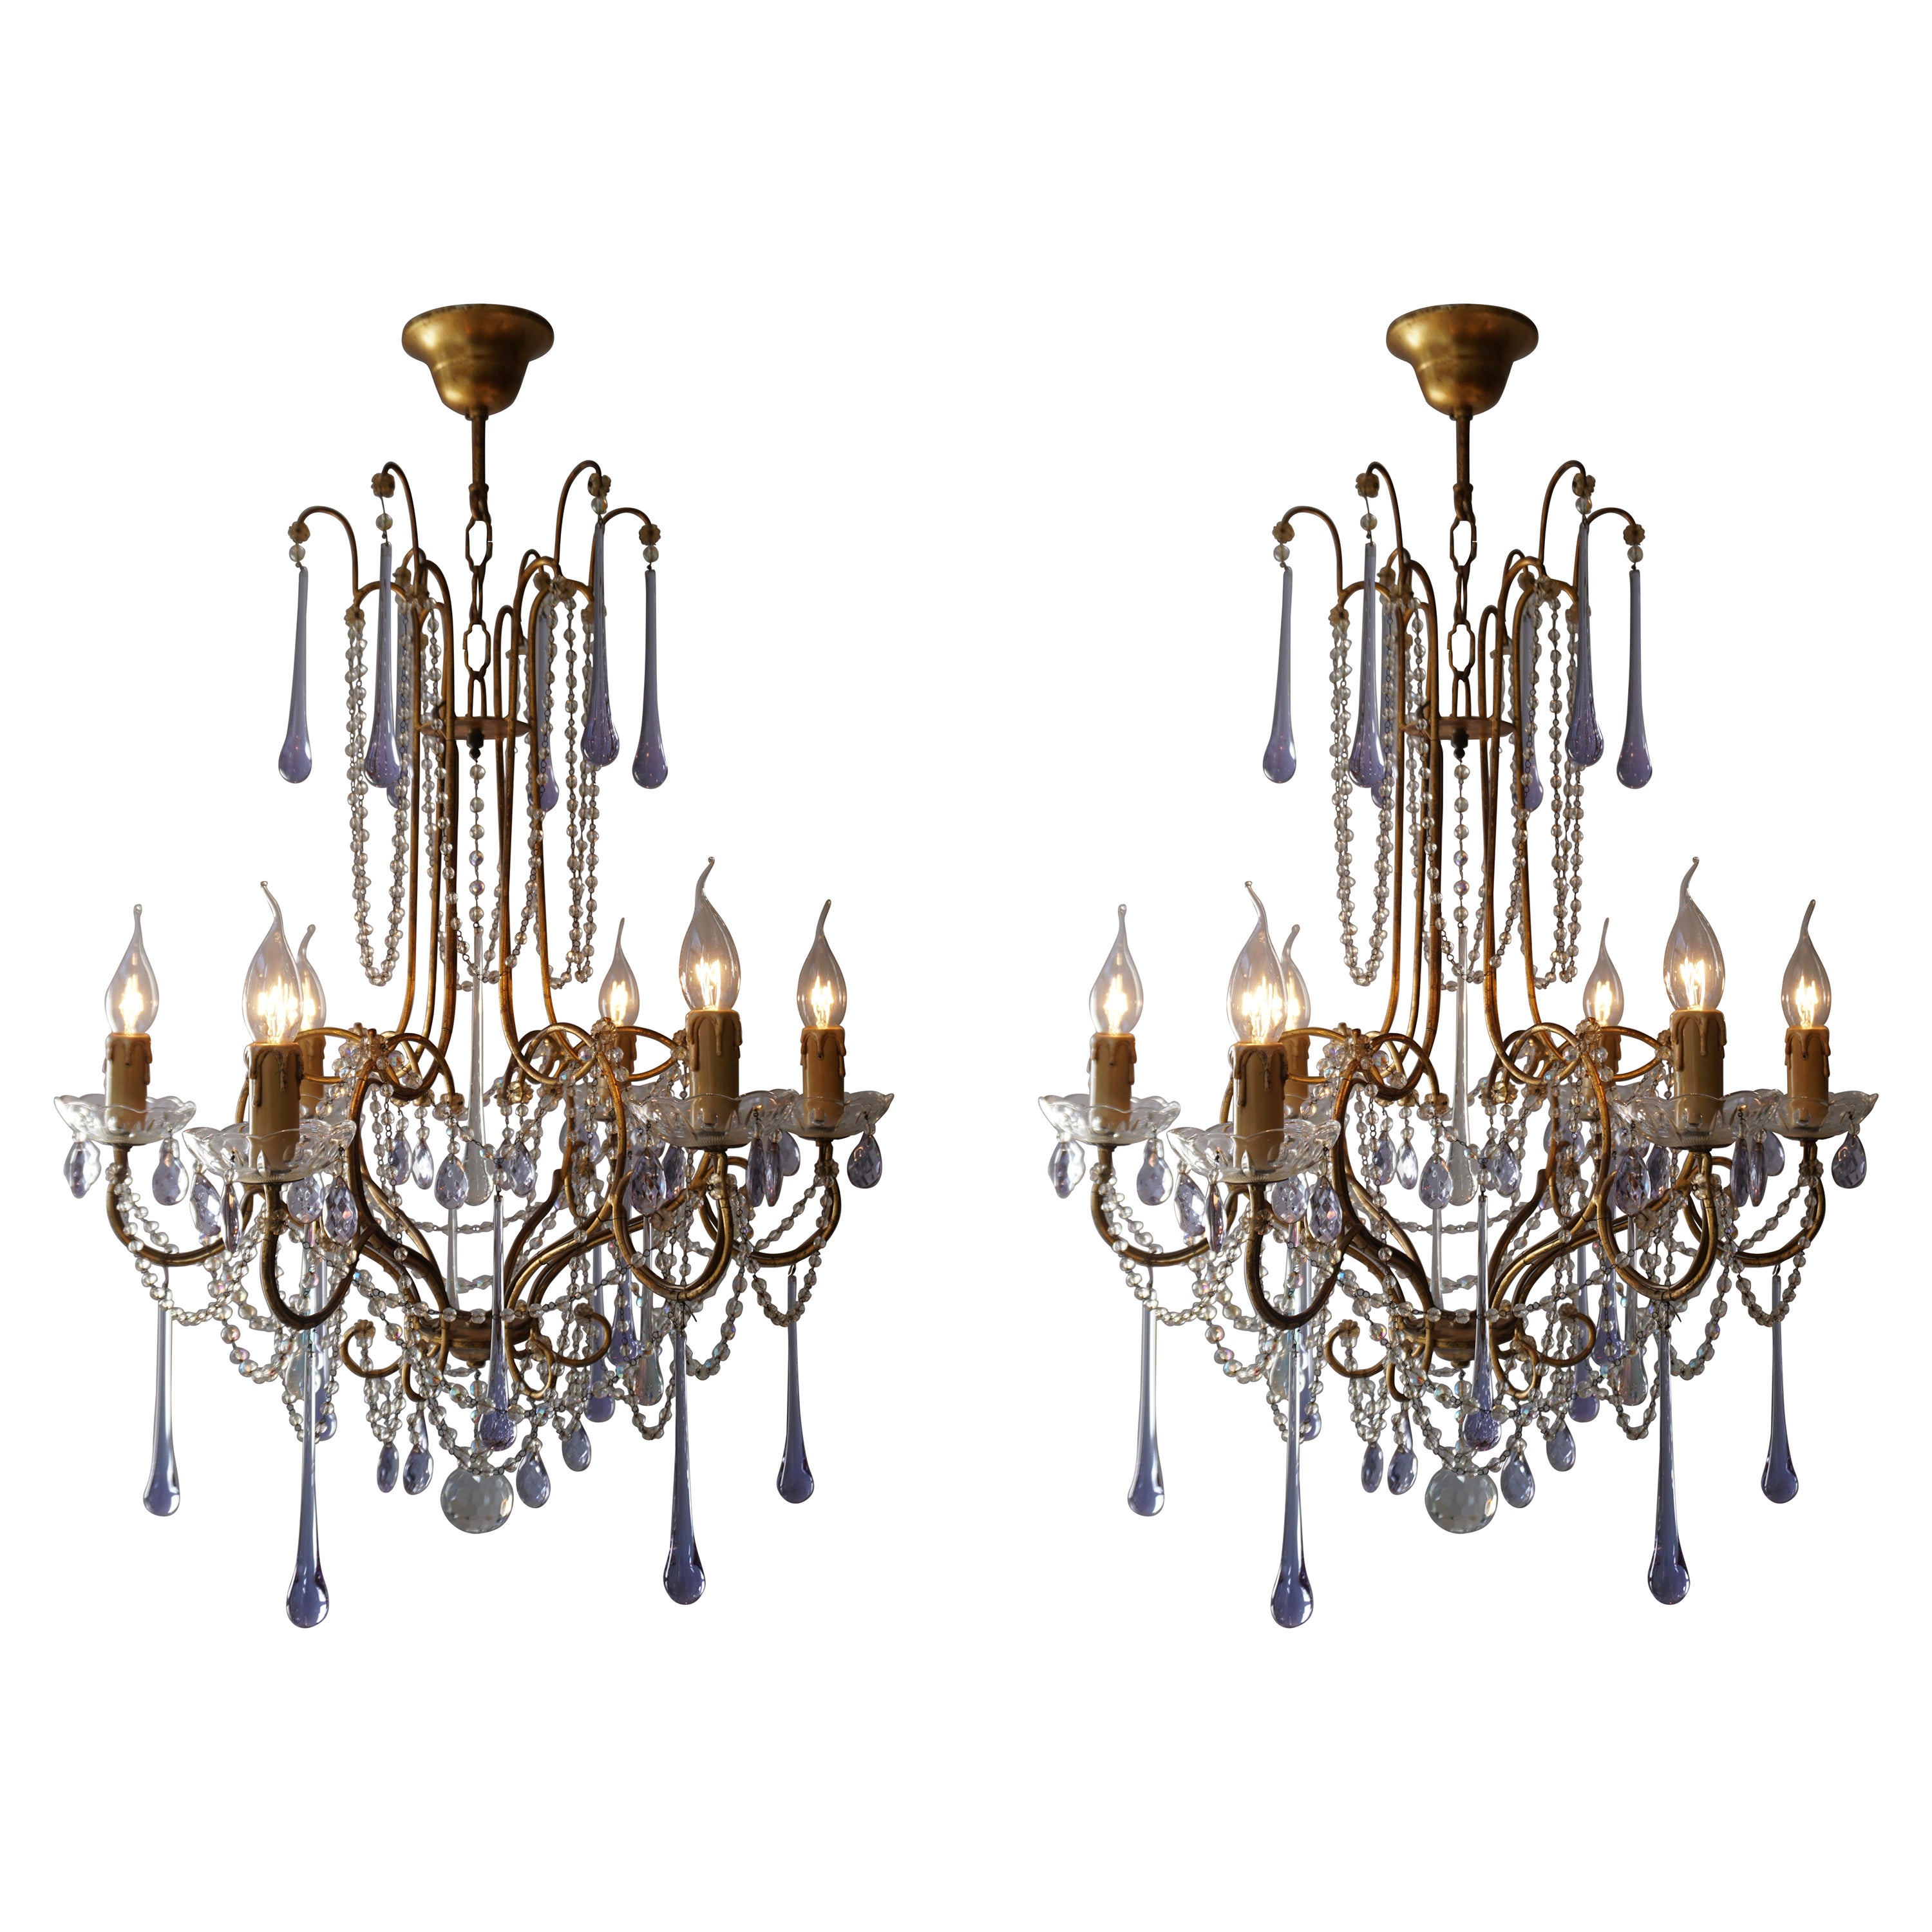 Pair of French Brass Chandeliers with Glass Teardrops